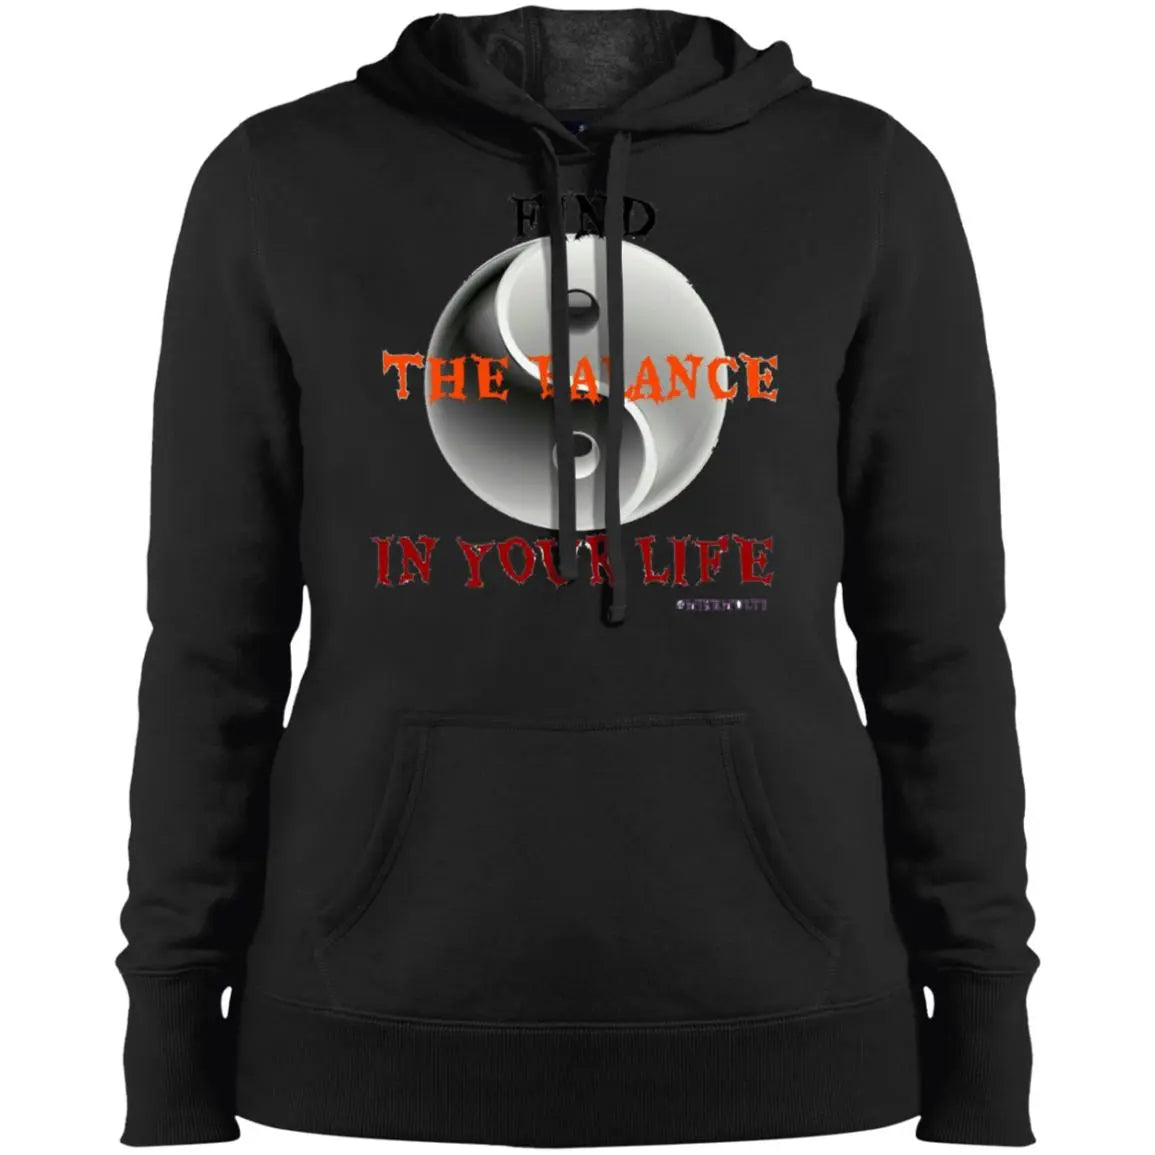 Find The Balance In Your Life - Ladies' Pullover Hooded Sweatshirt CustomCat